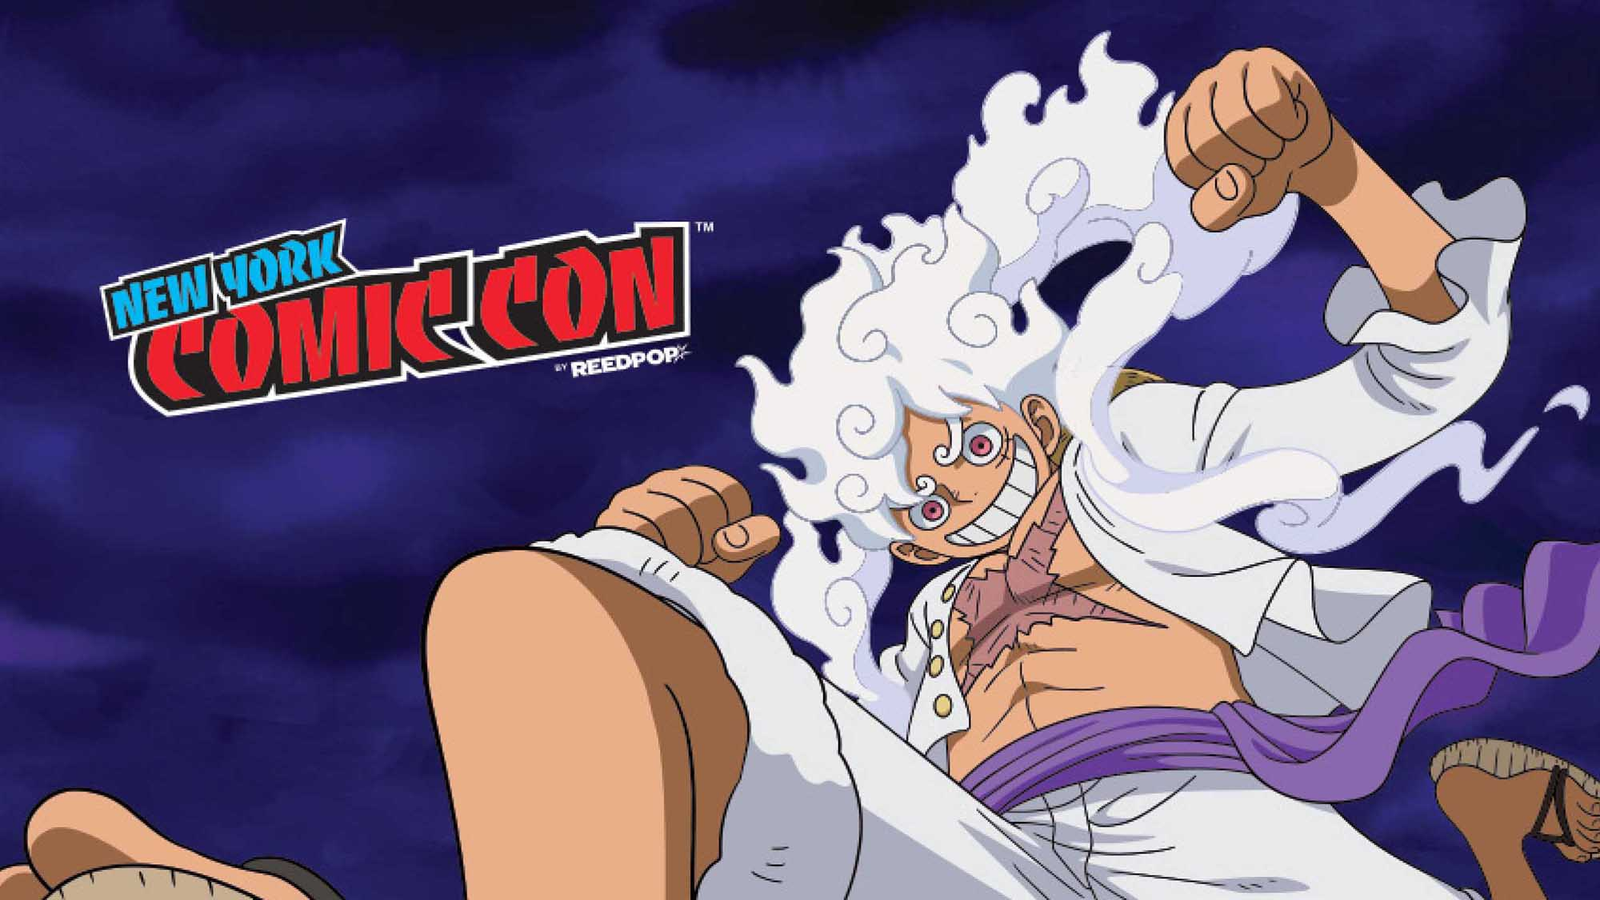 ONE PIECE Crunchyroll Anime 2019 NYCC New York Comic Con Exclusive PROMO  POSTER